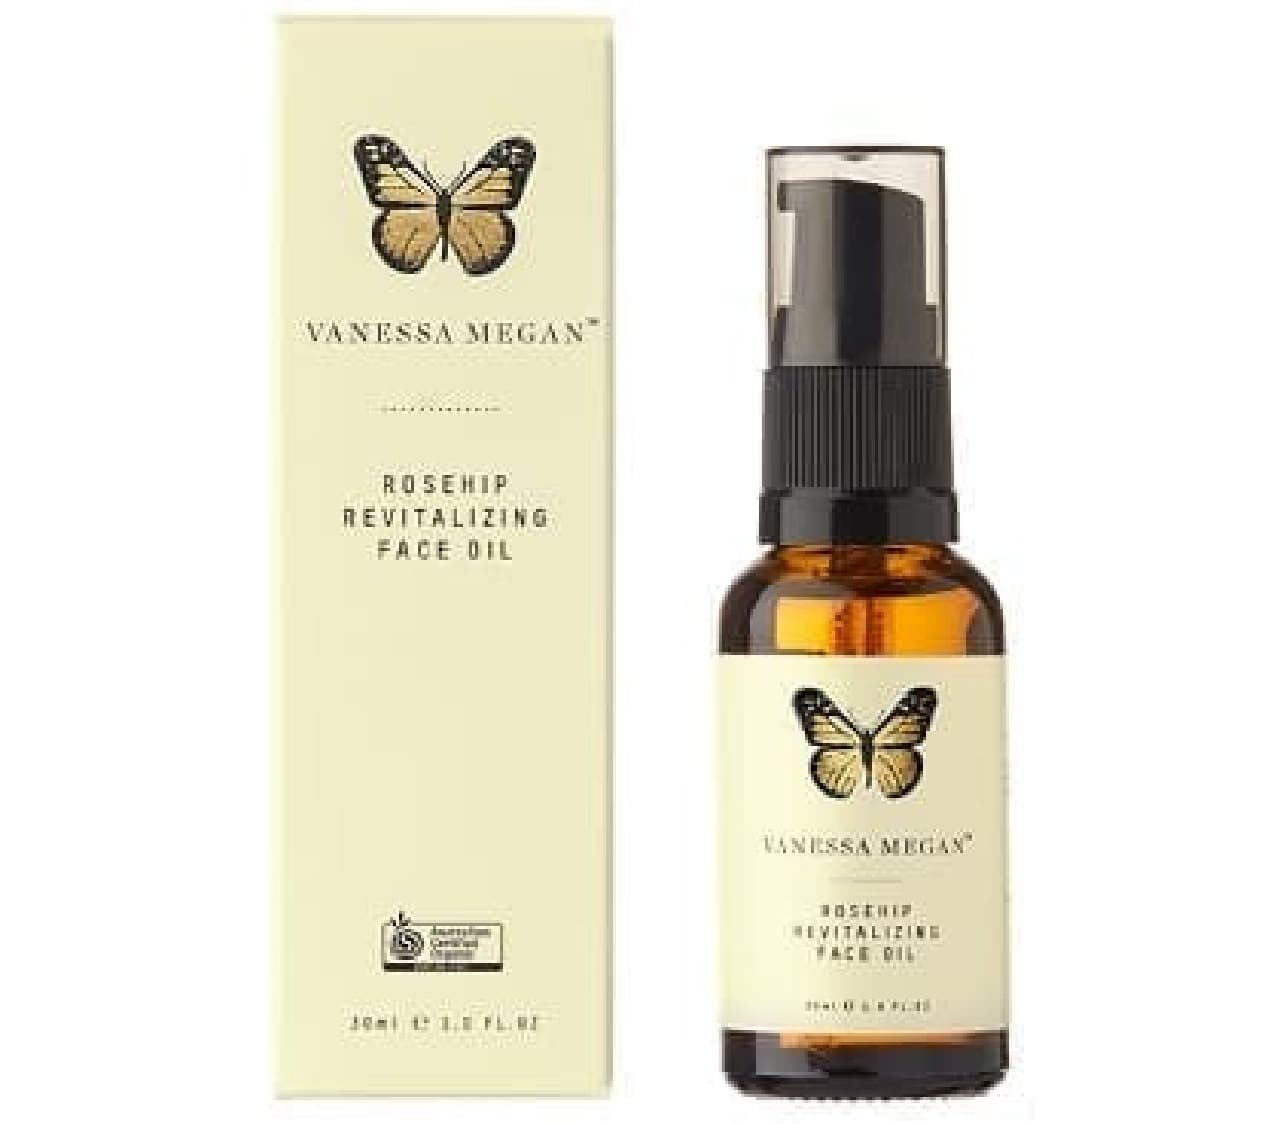 Face oil blended with organic organic oil